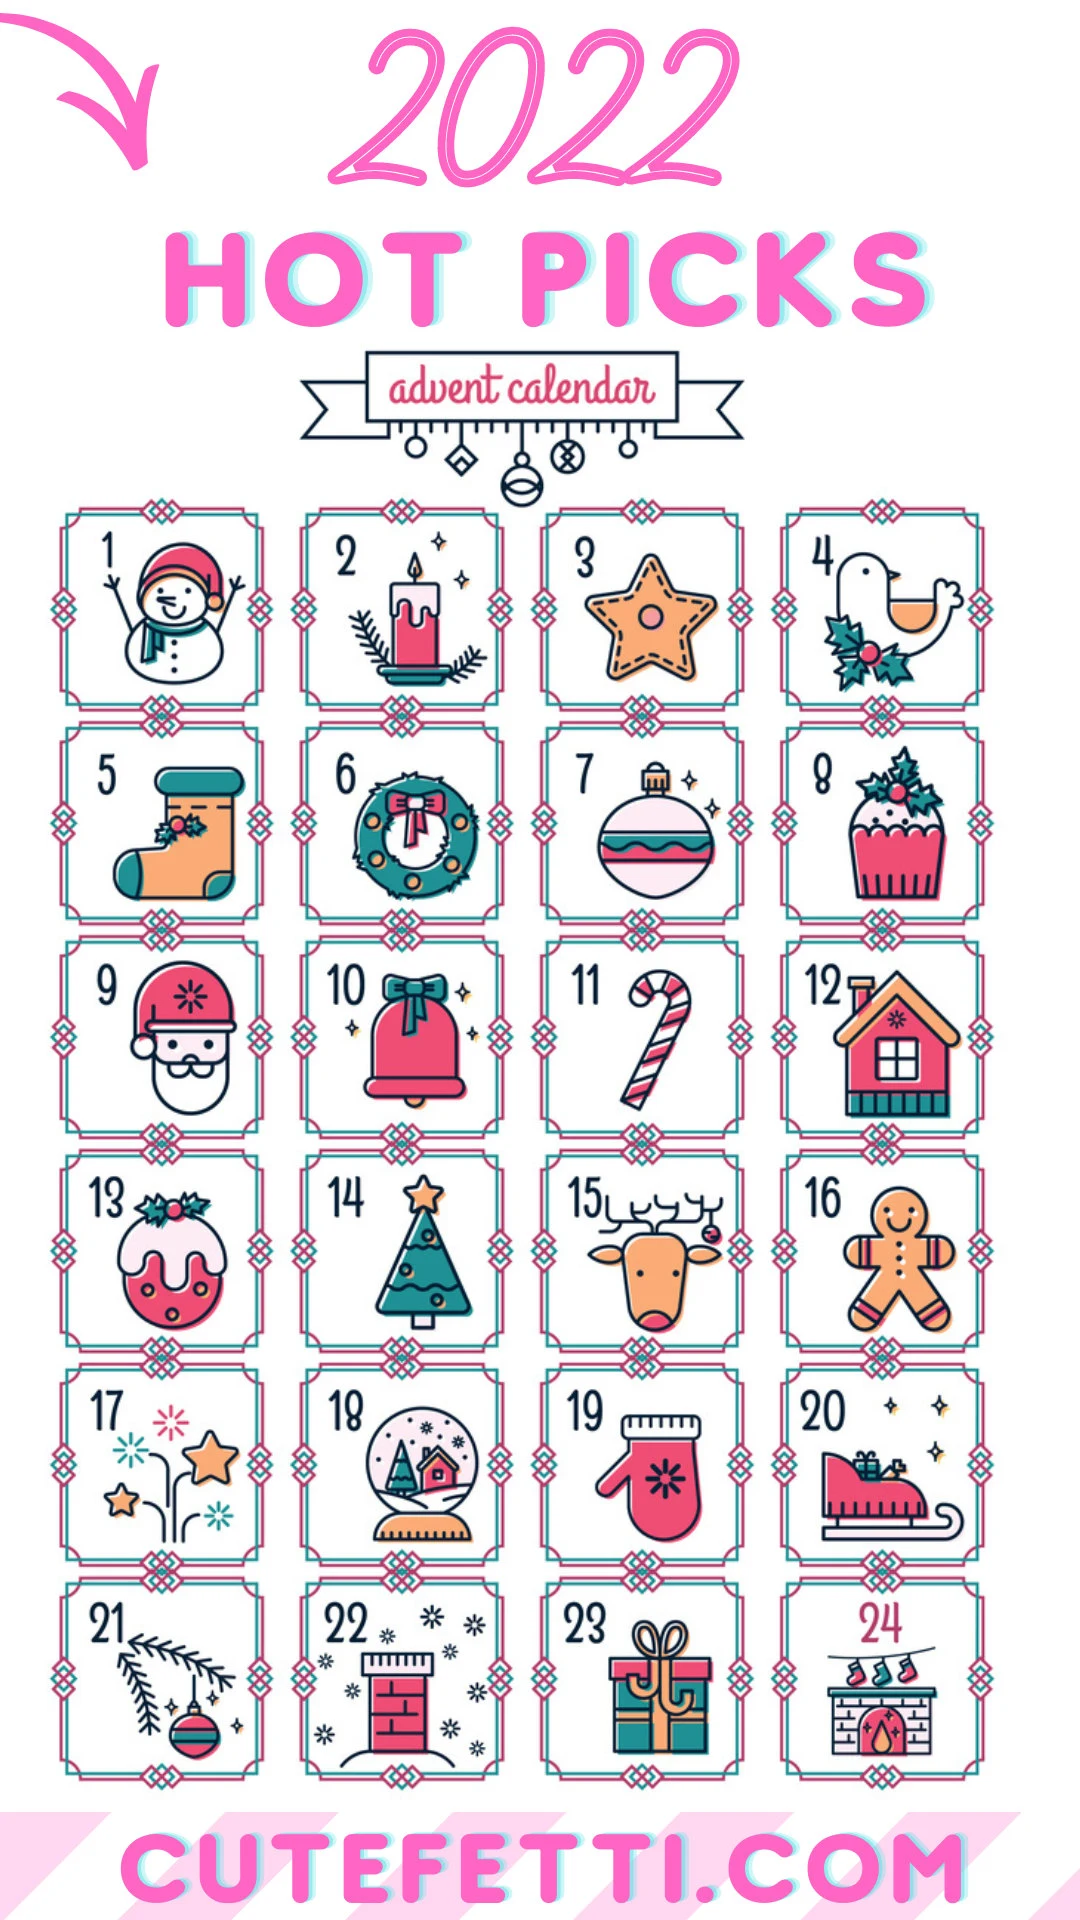 Best Christmas Countdown Calendars You Need In 2022 | Cutefetti